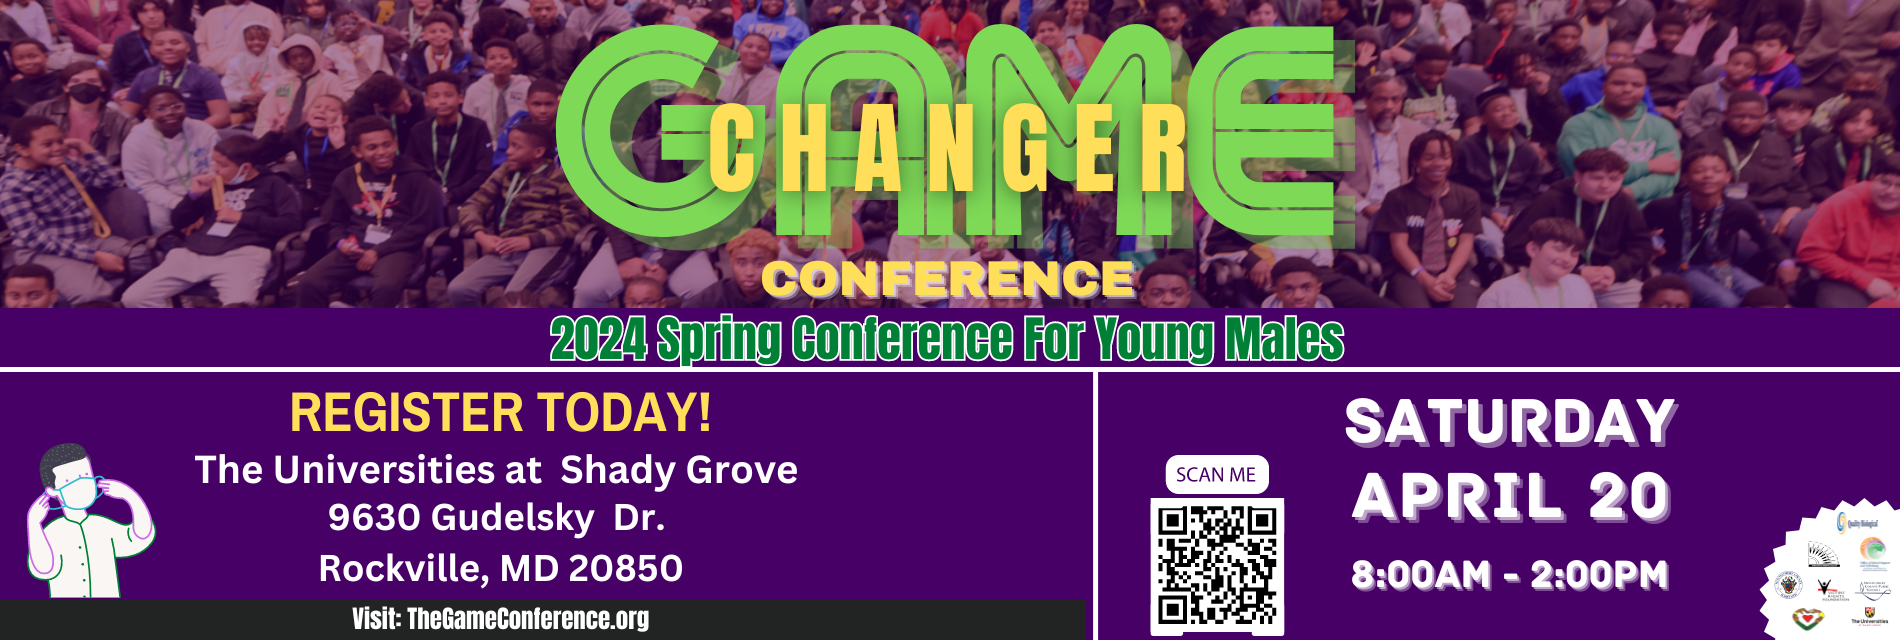 _GAME Changer Conf - Spr 2024 (1900 x 640 px) English.png